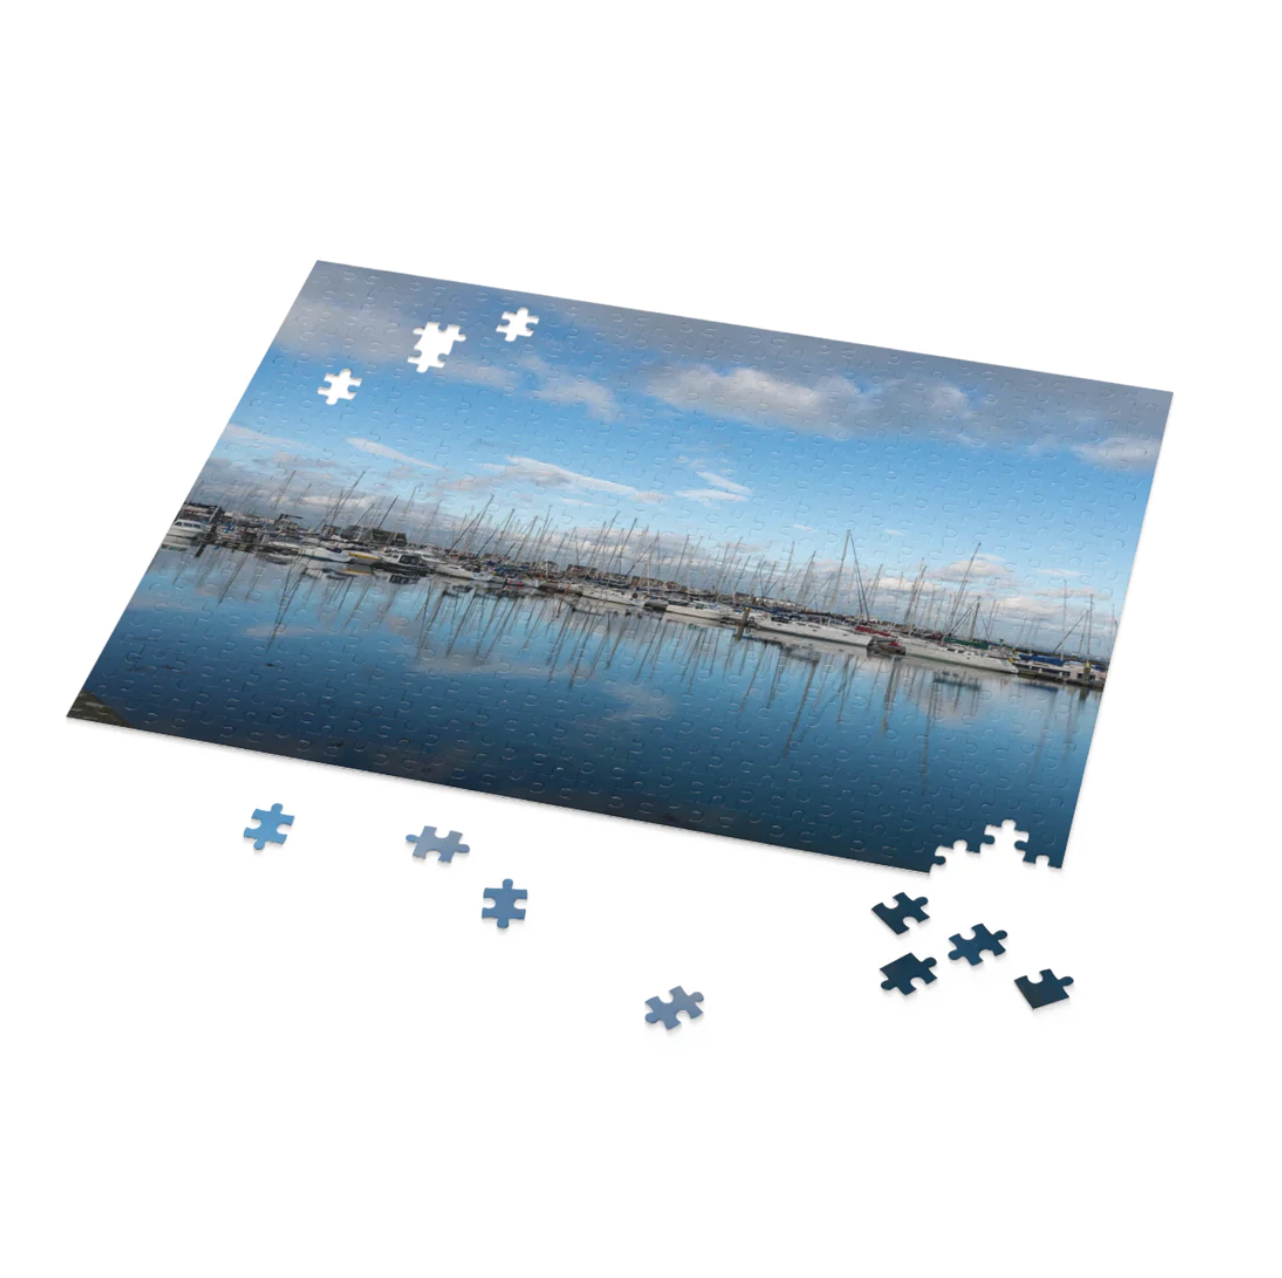 Leah Ramuglia's travel photographs are printed on puzzles